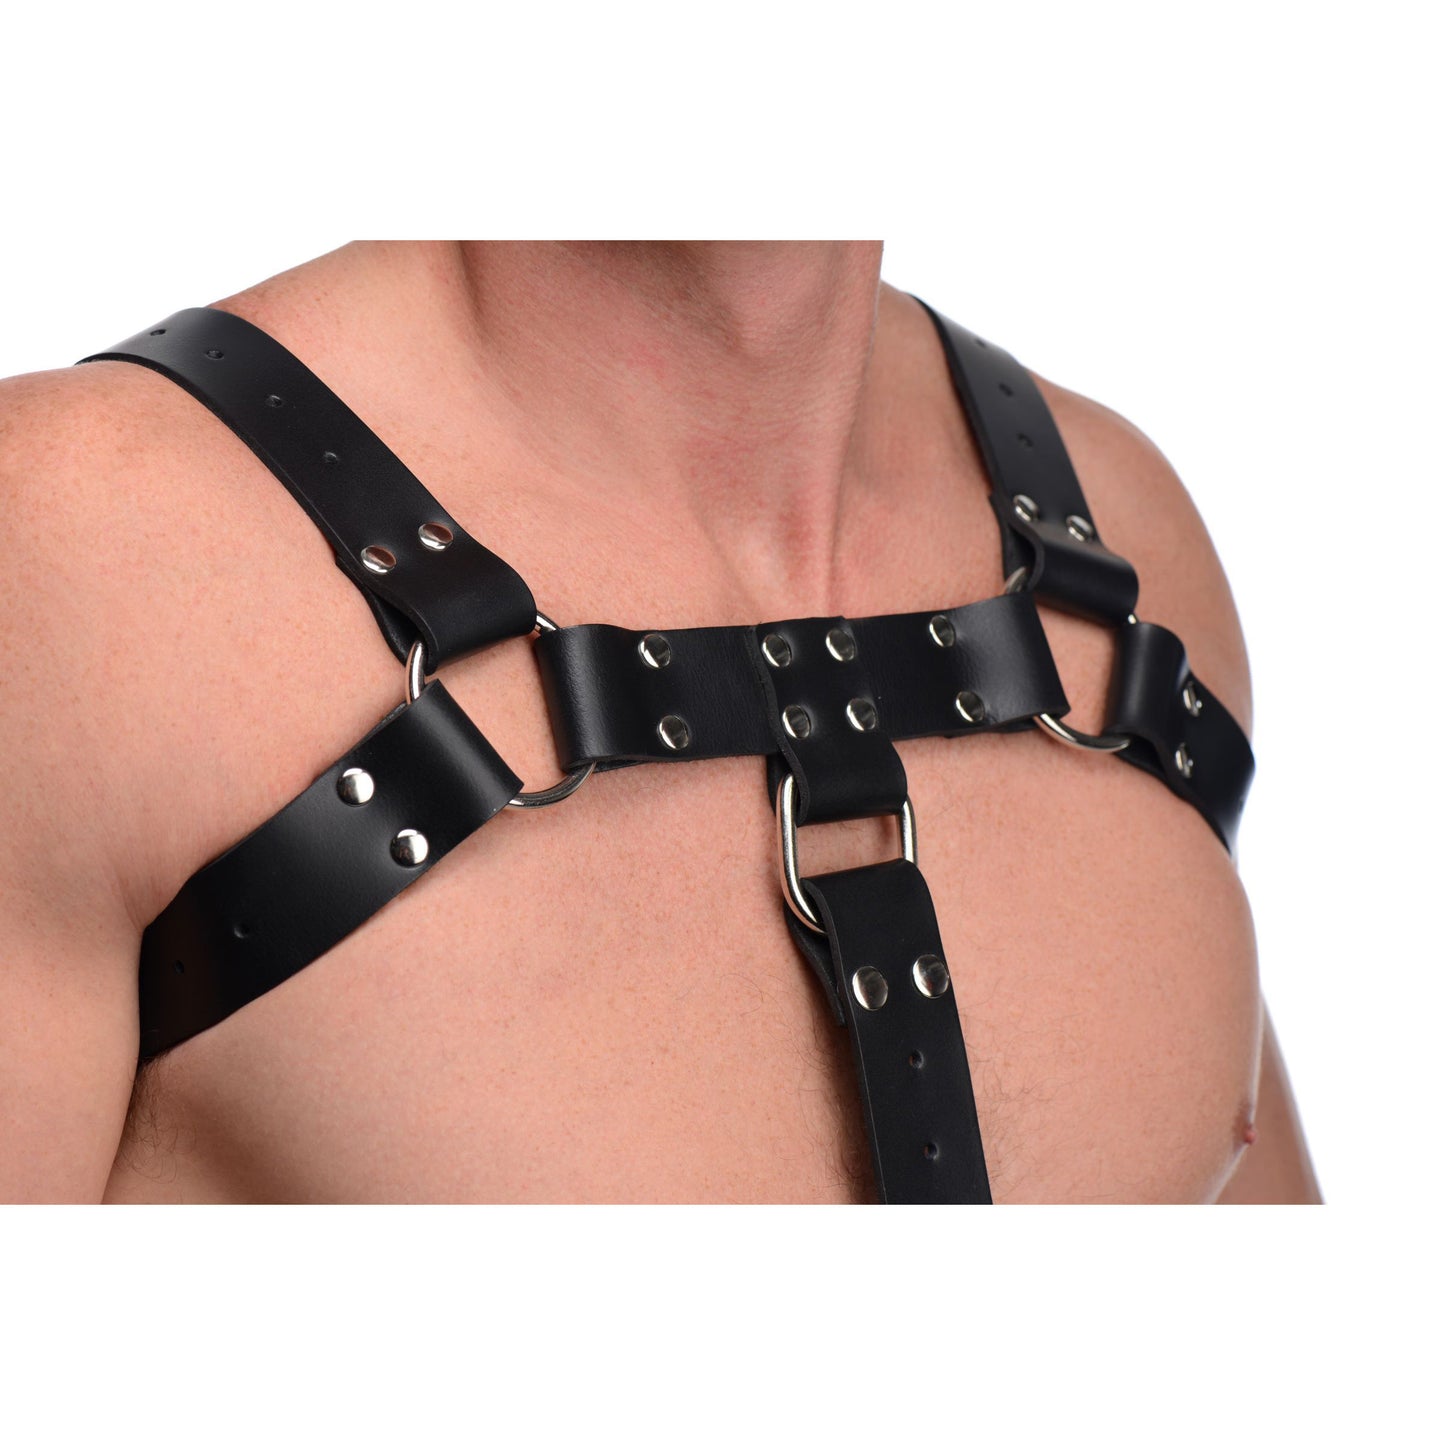 English Bull Dog Harness with Cock Strap - UABDSM